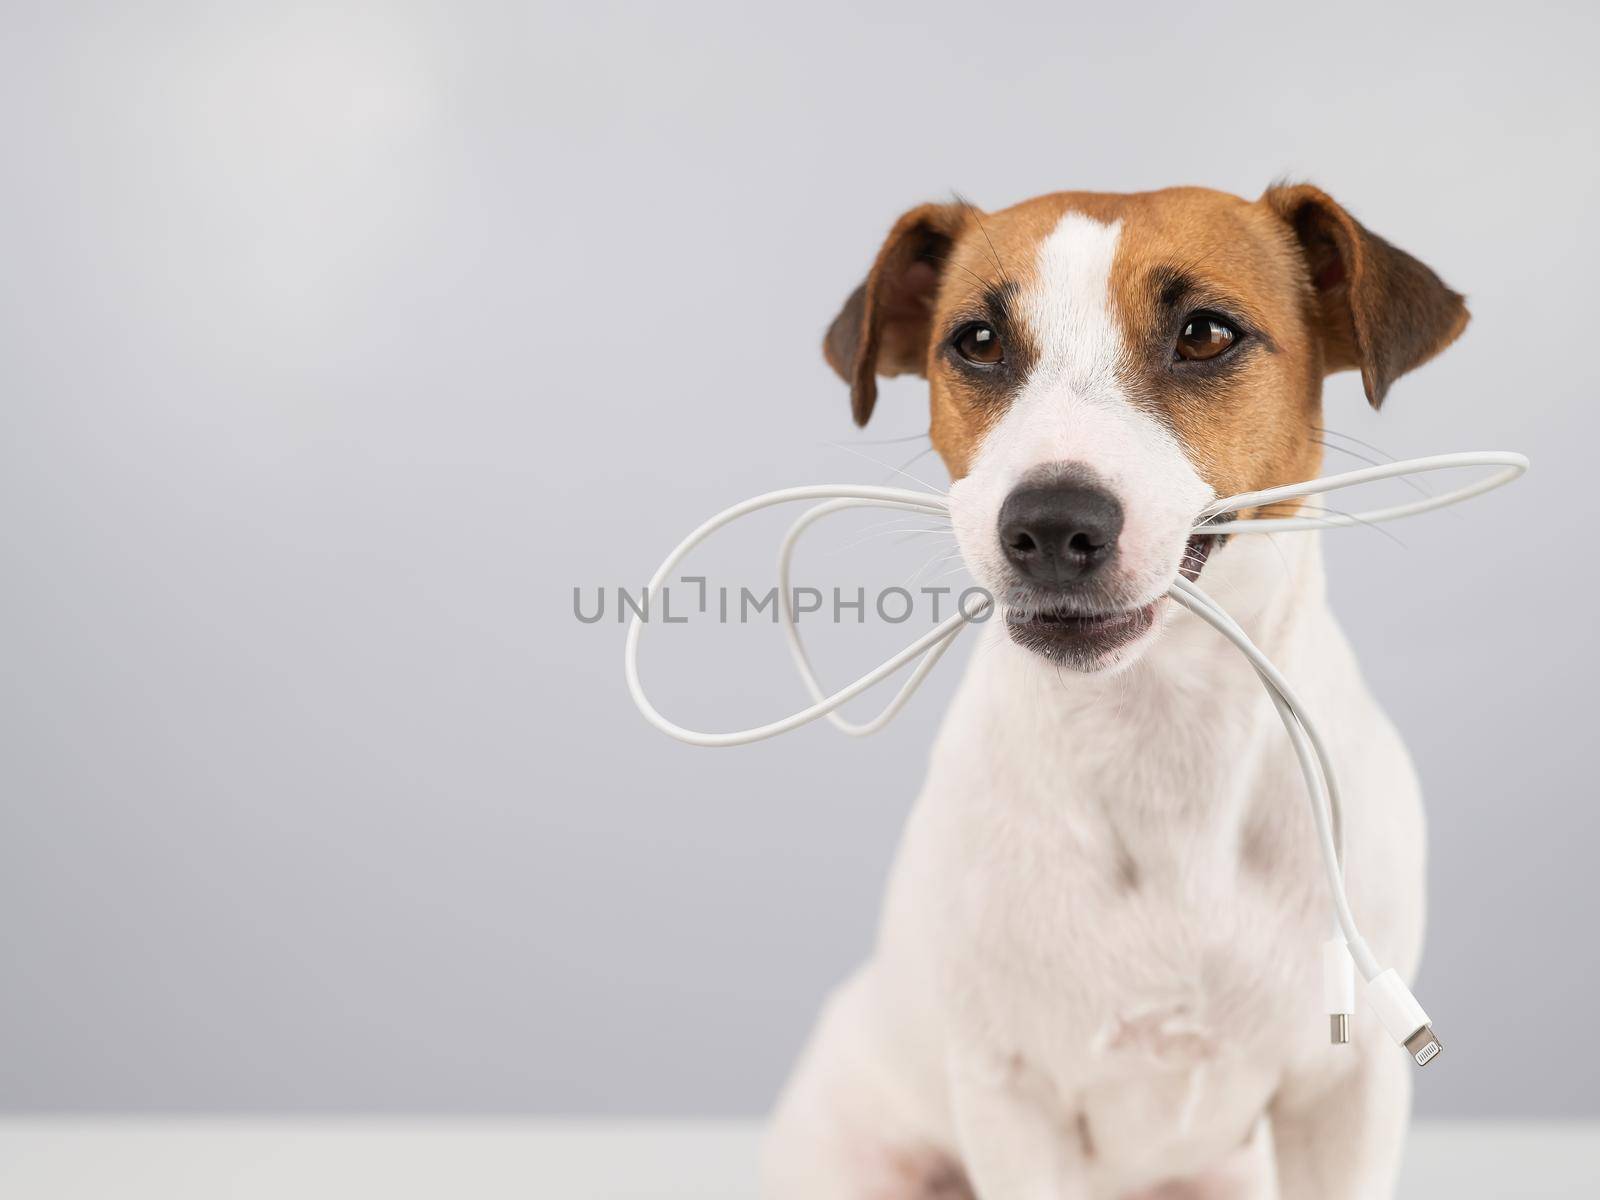 Jack russell terrier dog holding a type c cable in his teeth on a white background. Copy space